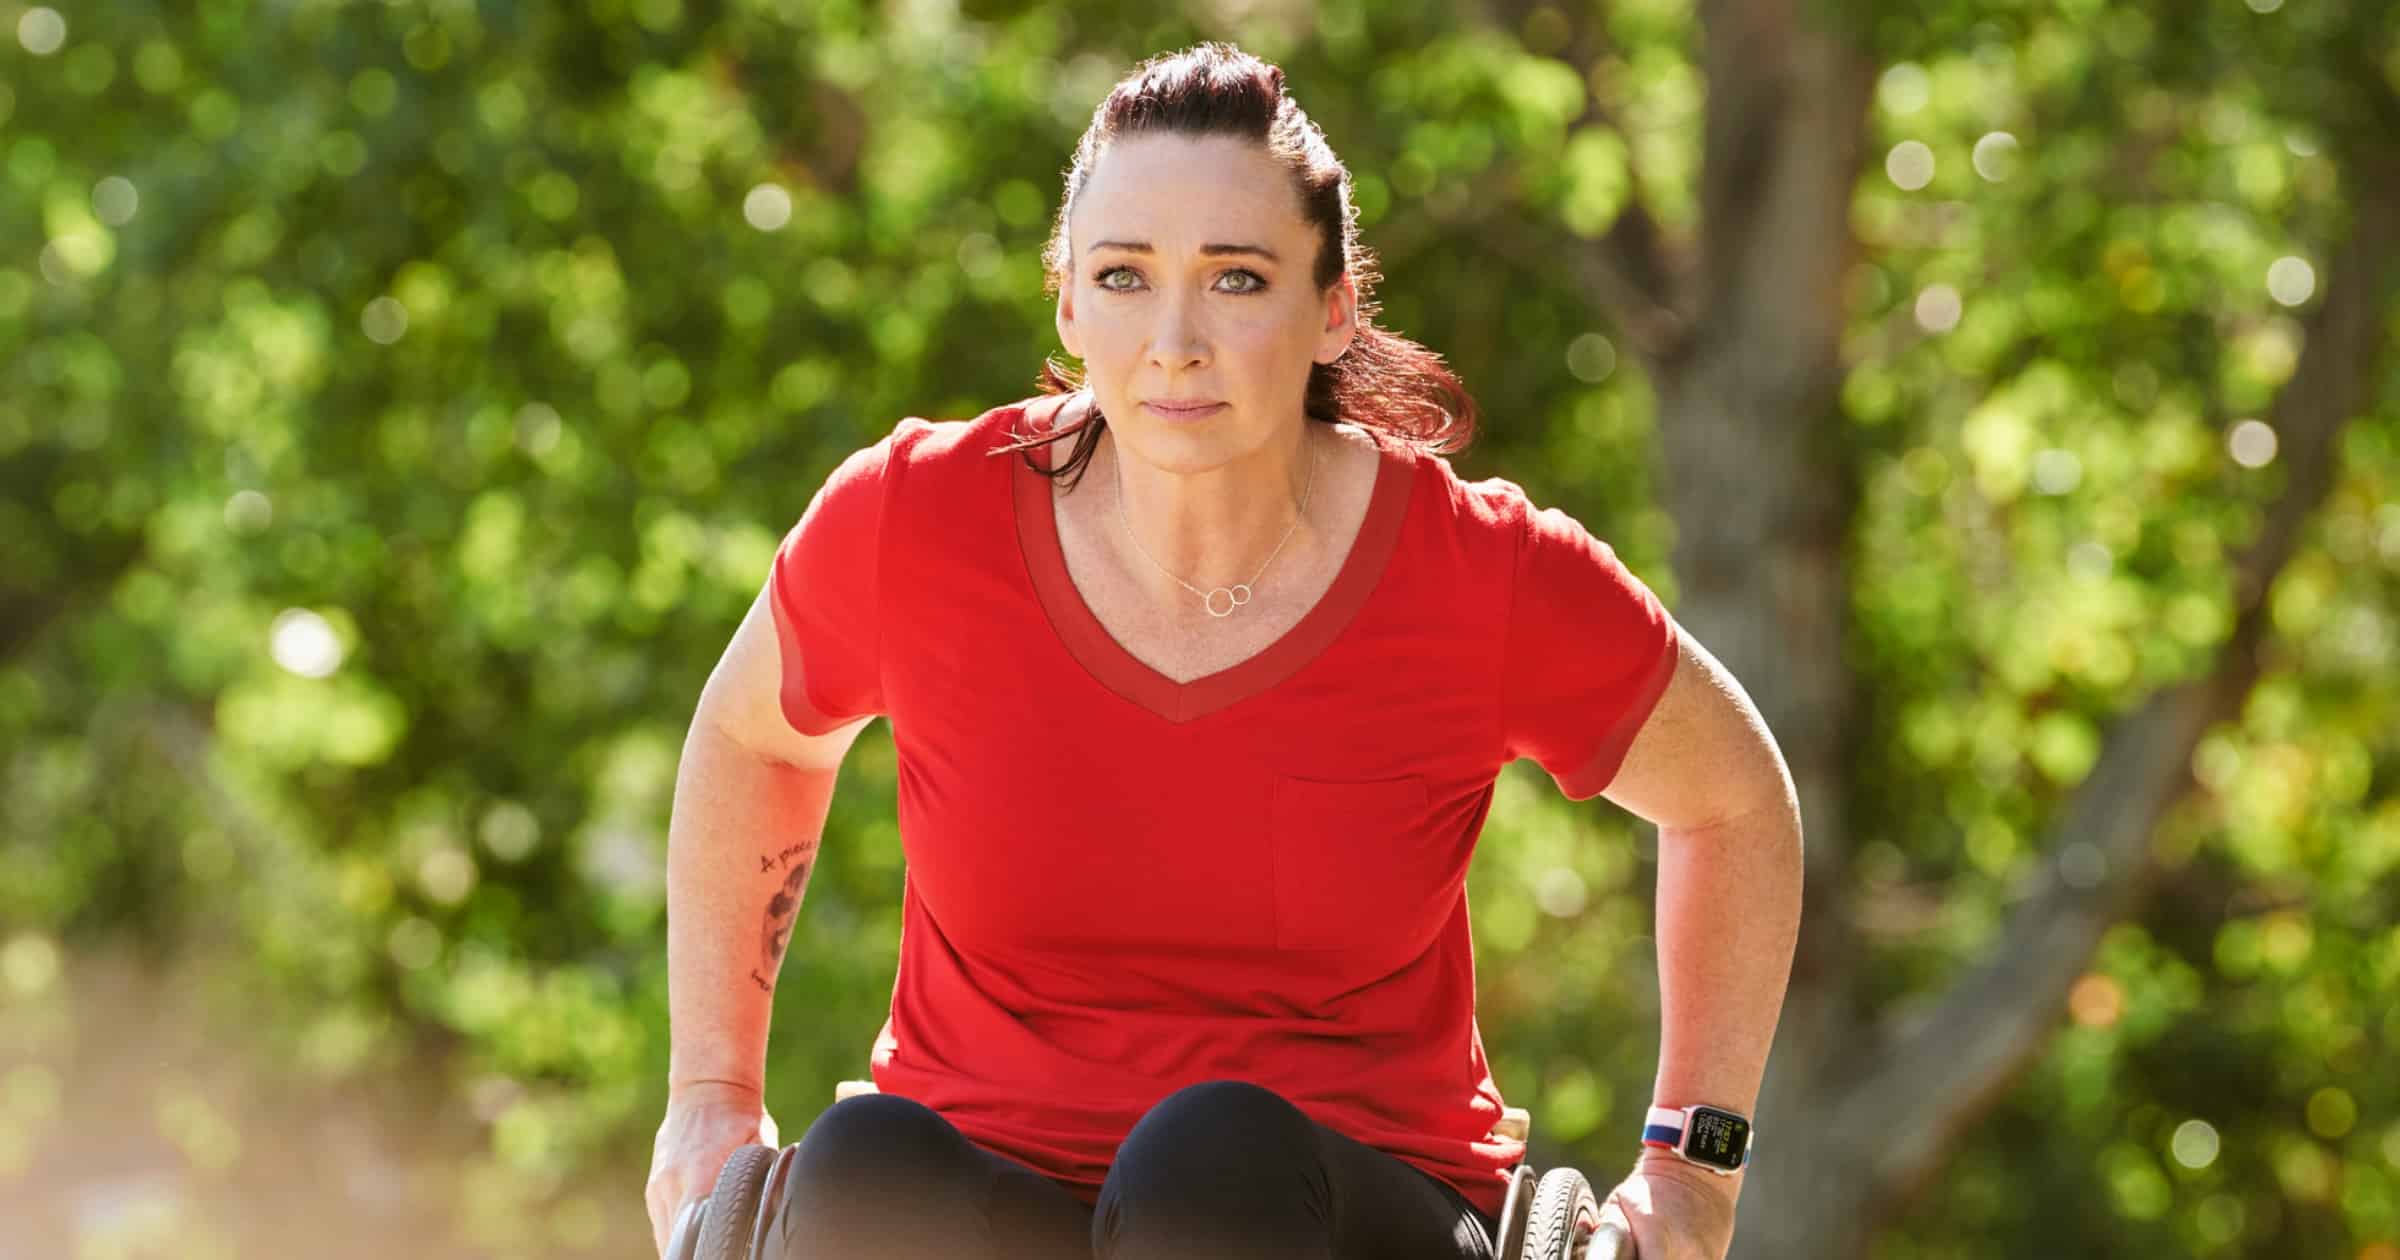 Olympian Amy Van Dyken Highlights Apple Watch Accessibility Features